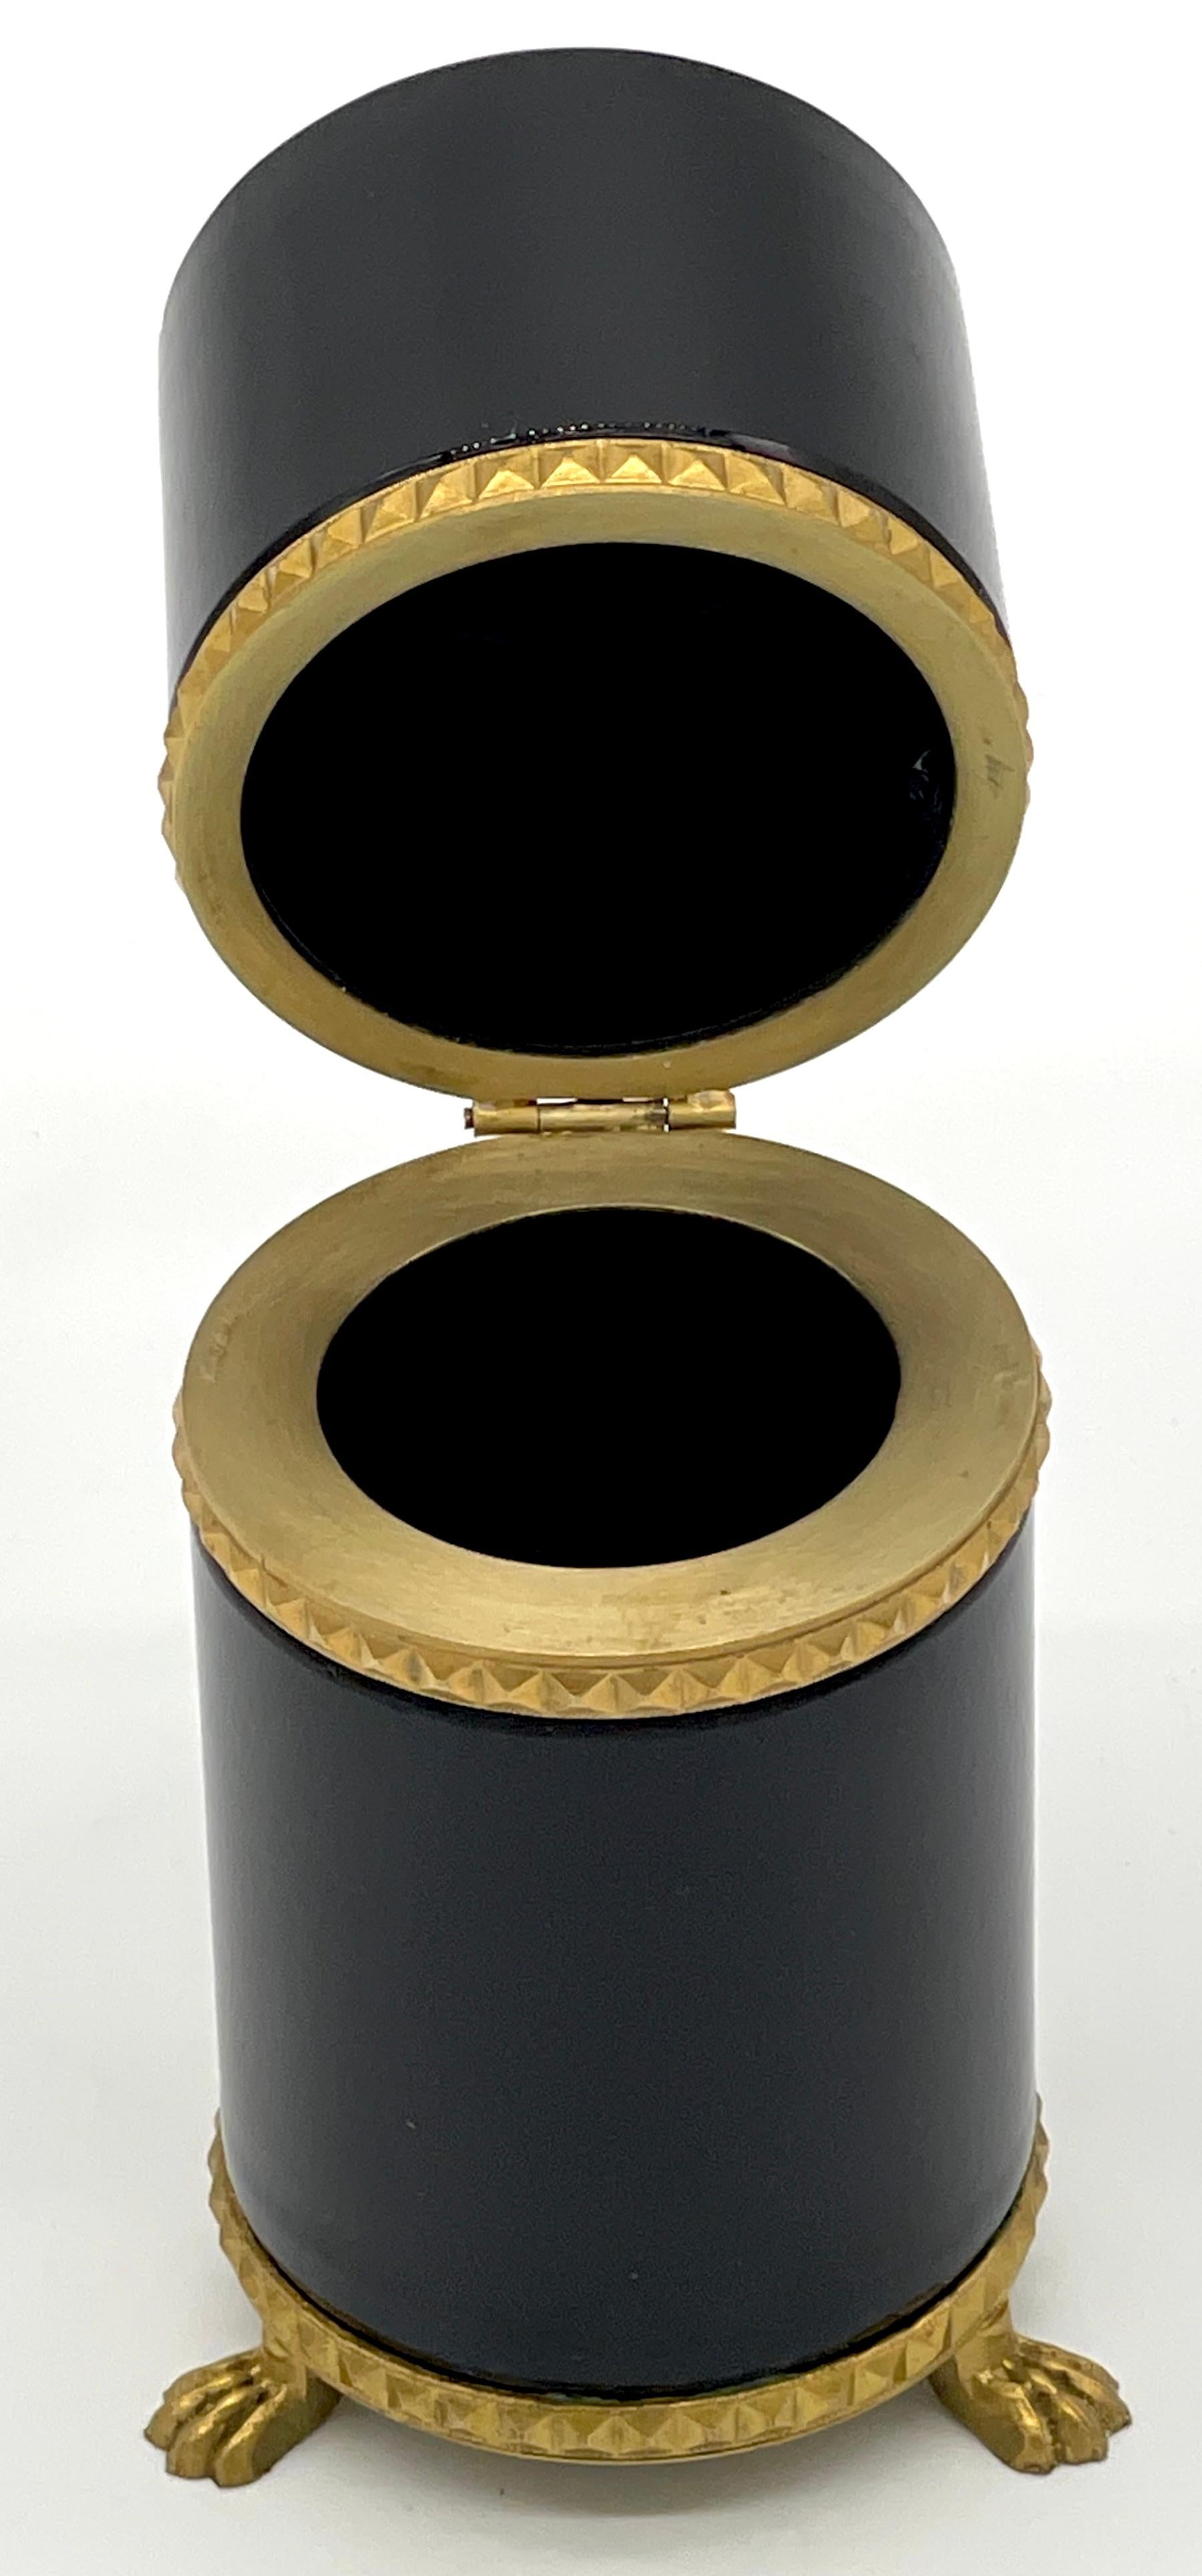 Neoclassical Italian Neoclassic Gilt Bronze Mounted  Black Murano Glass Tall Cylinder Box For Sale